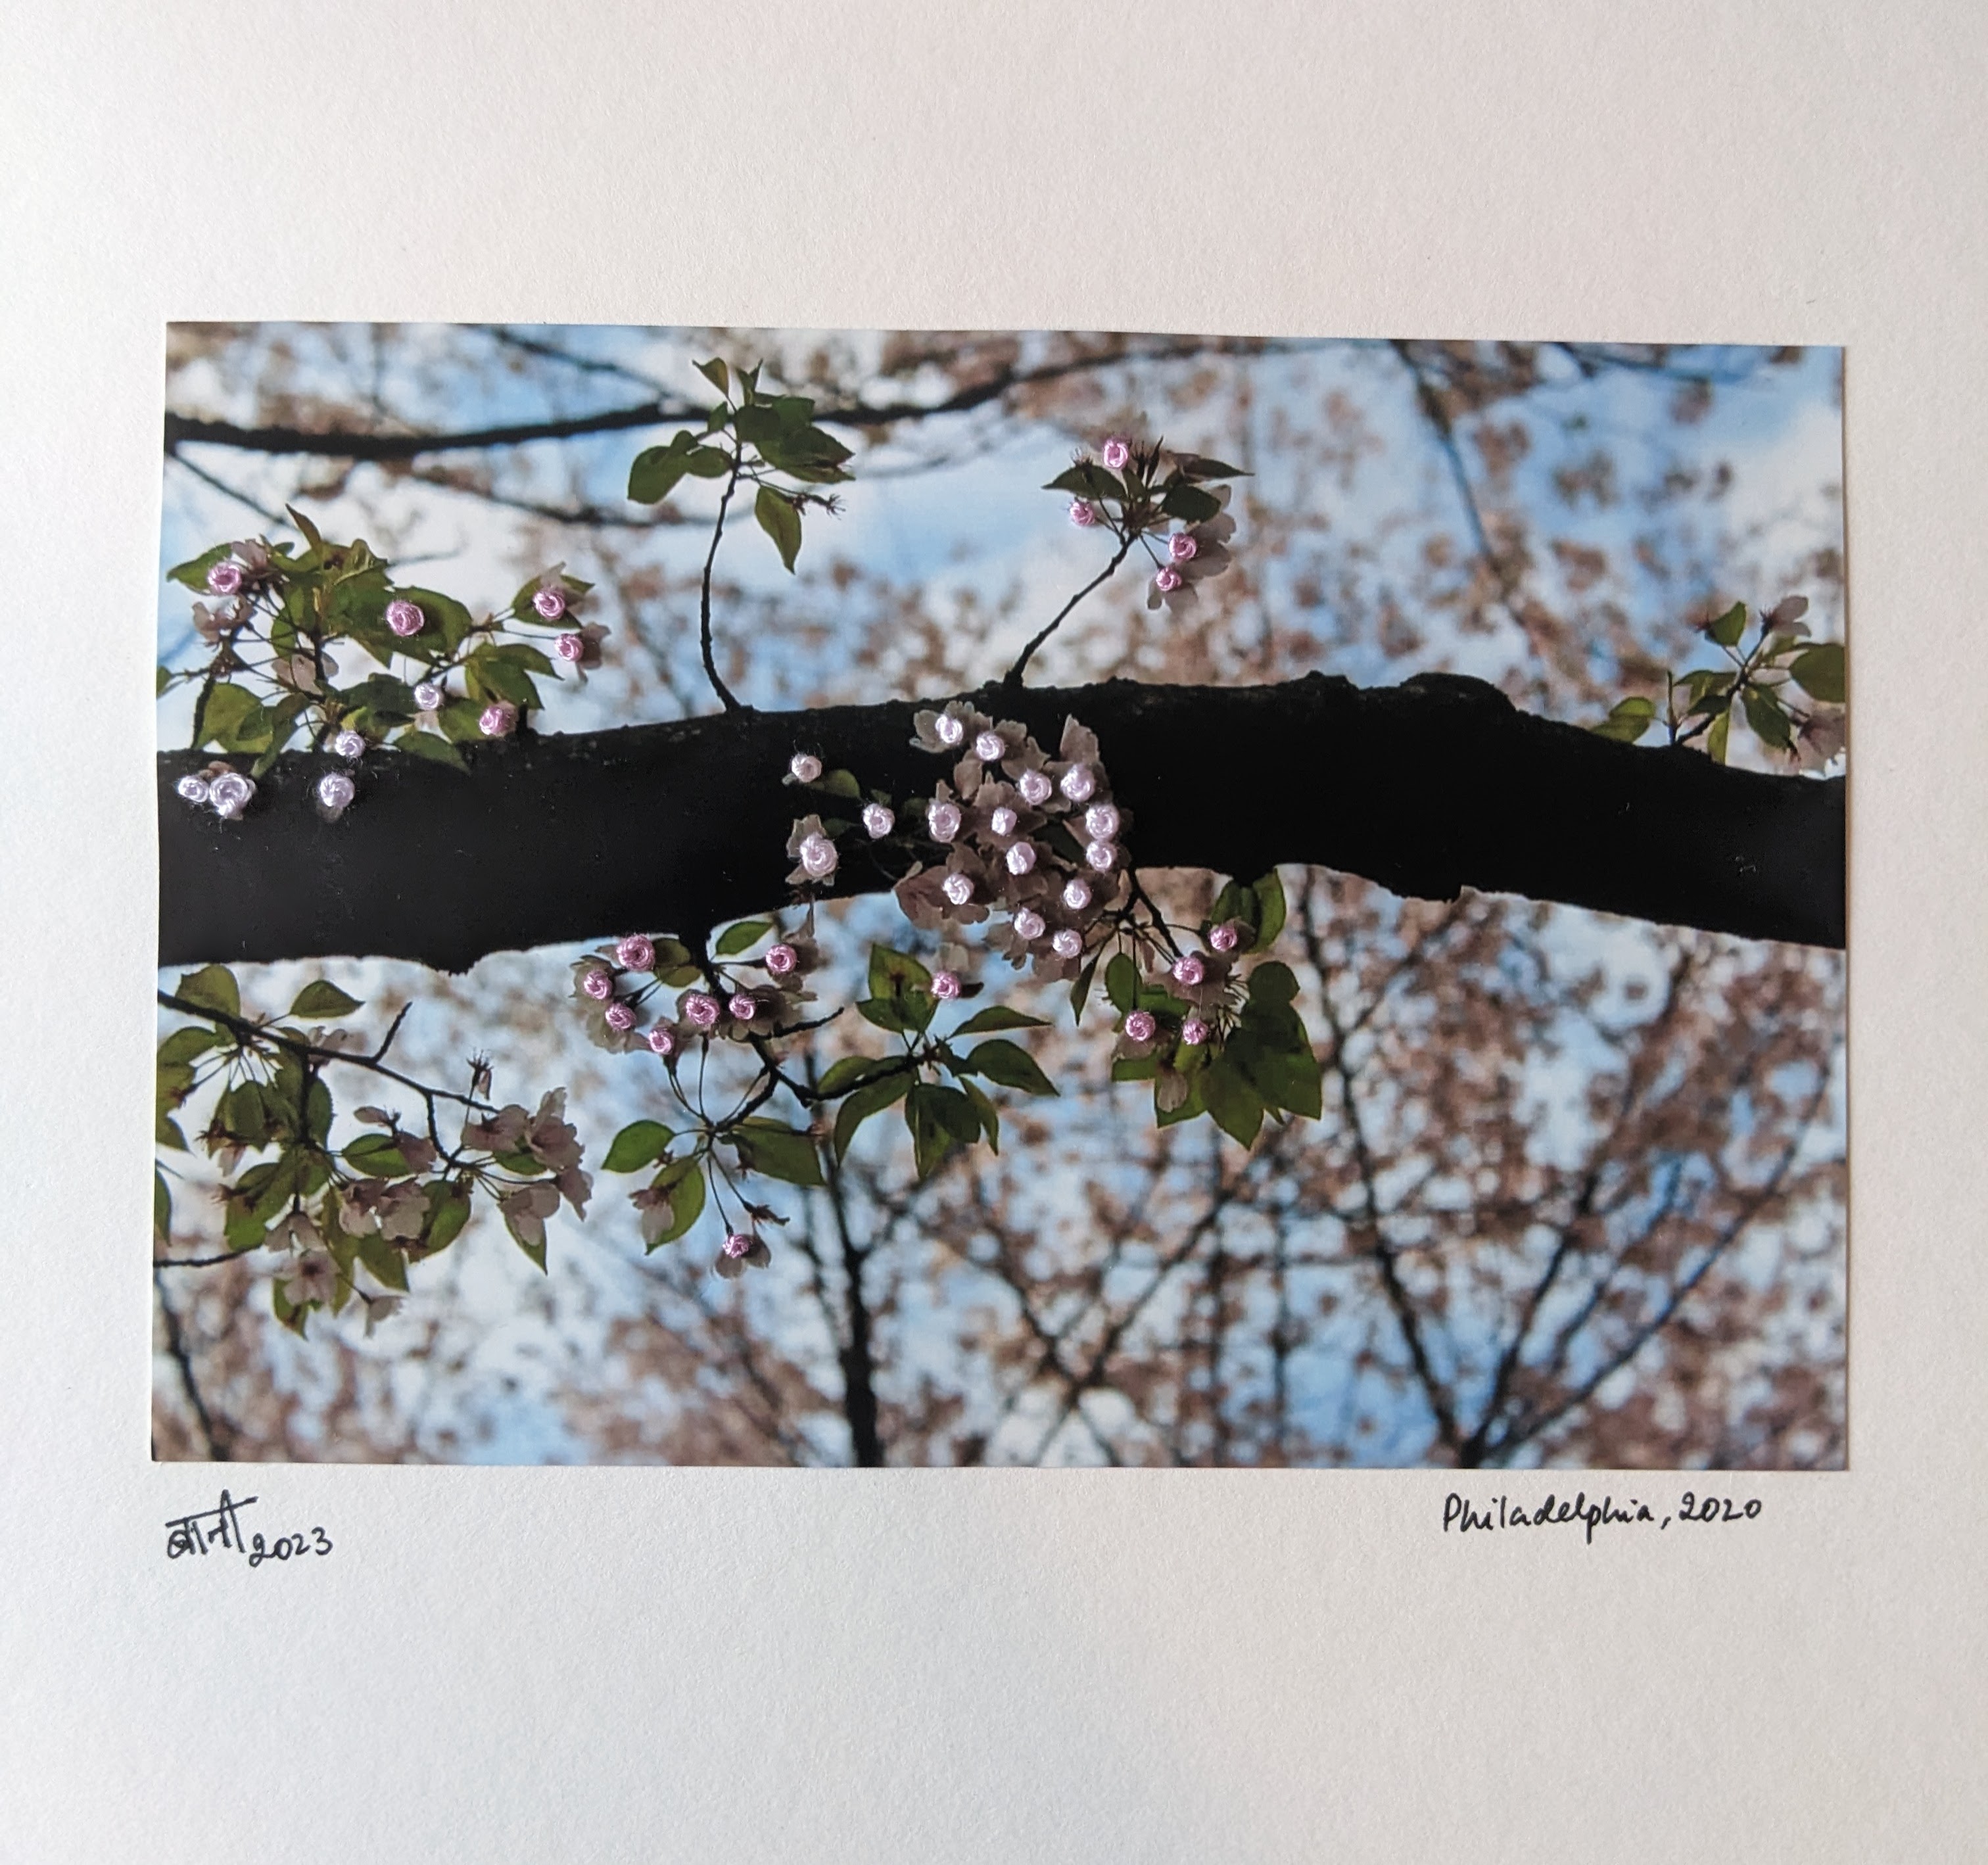 Photo embroidery on a cherryblossom photo using threads